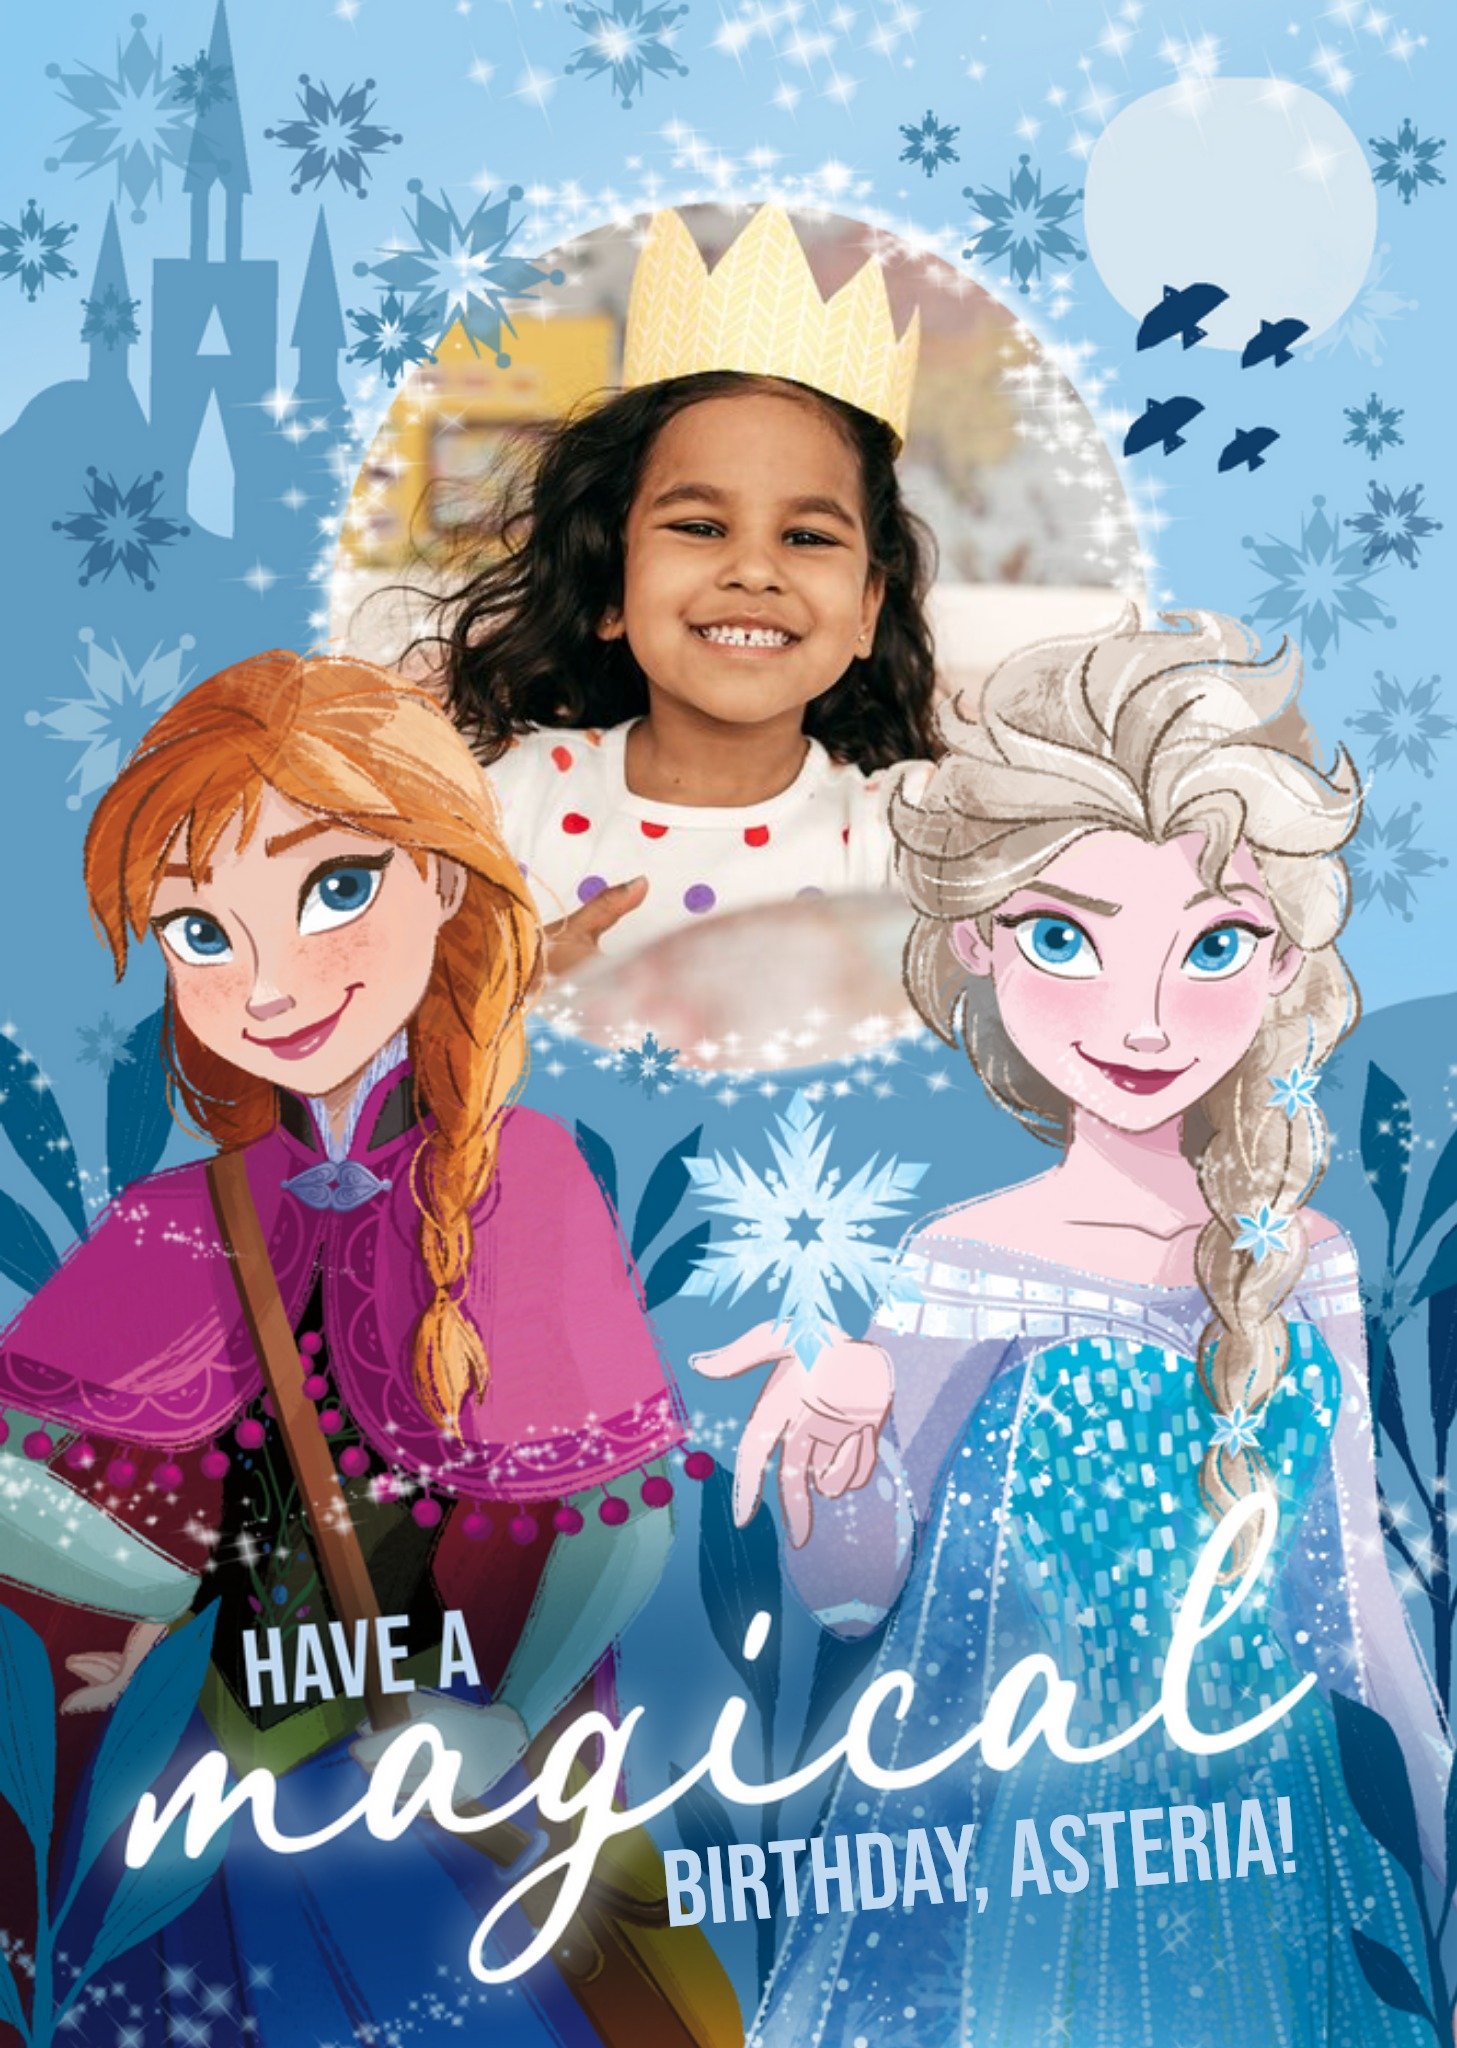 Disney Frozen Elsa And Anna Magical Photo Upload Birthday Card, Large